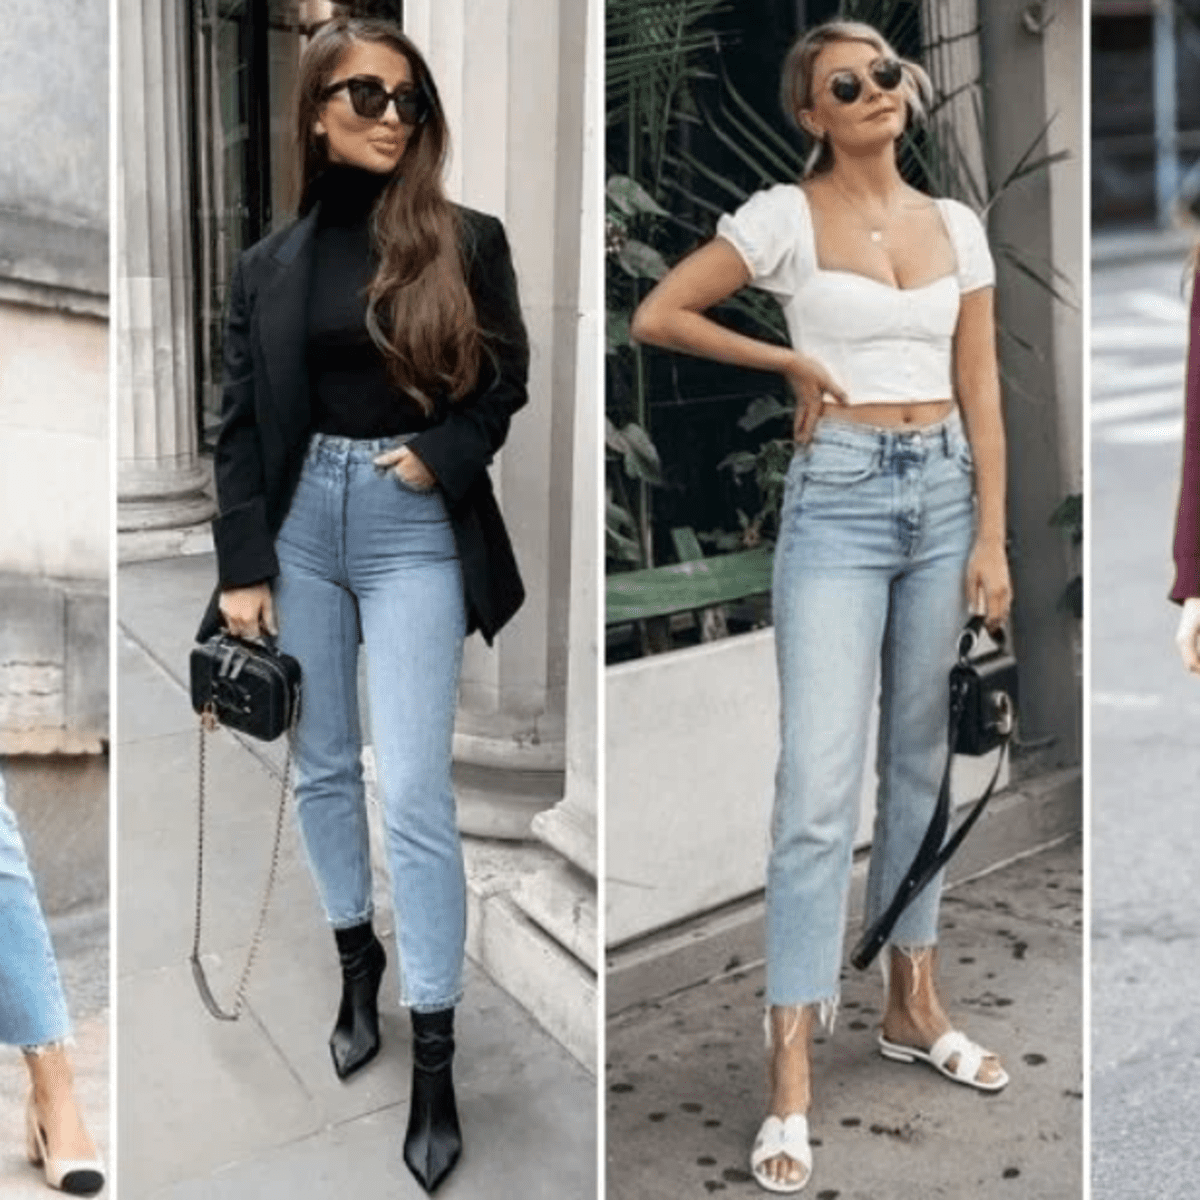 5 Chic Looks Petite/Short Girls Should Try